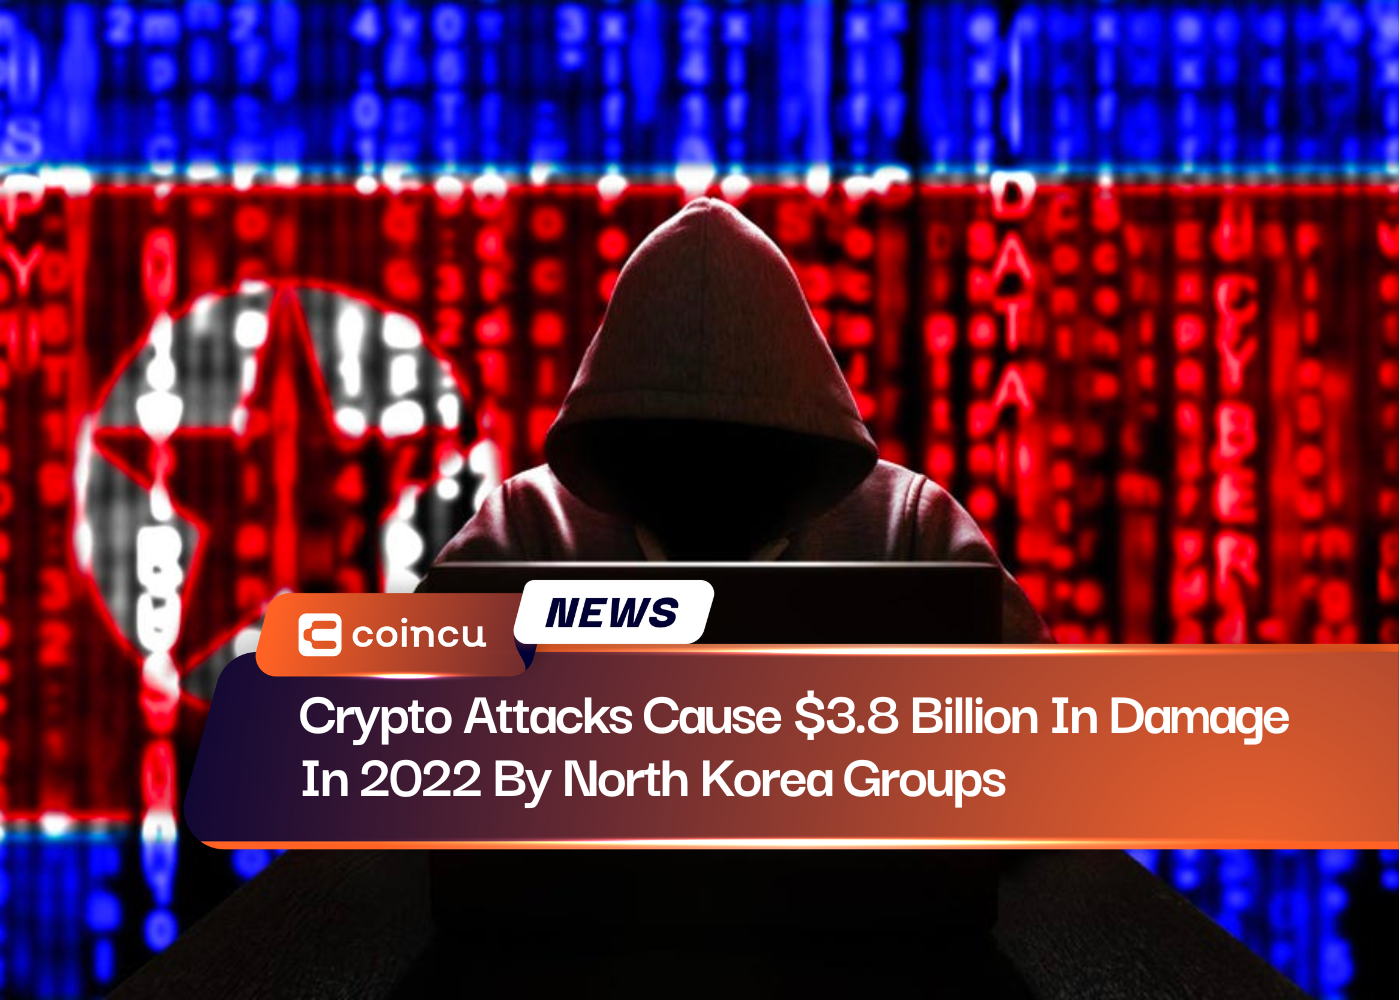 Crypto Attacks Cause $3.8 Billion In Damage In 2022 By North Korea Groups